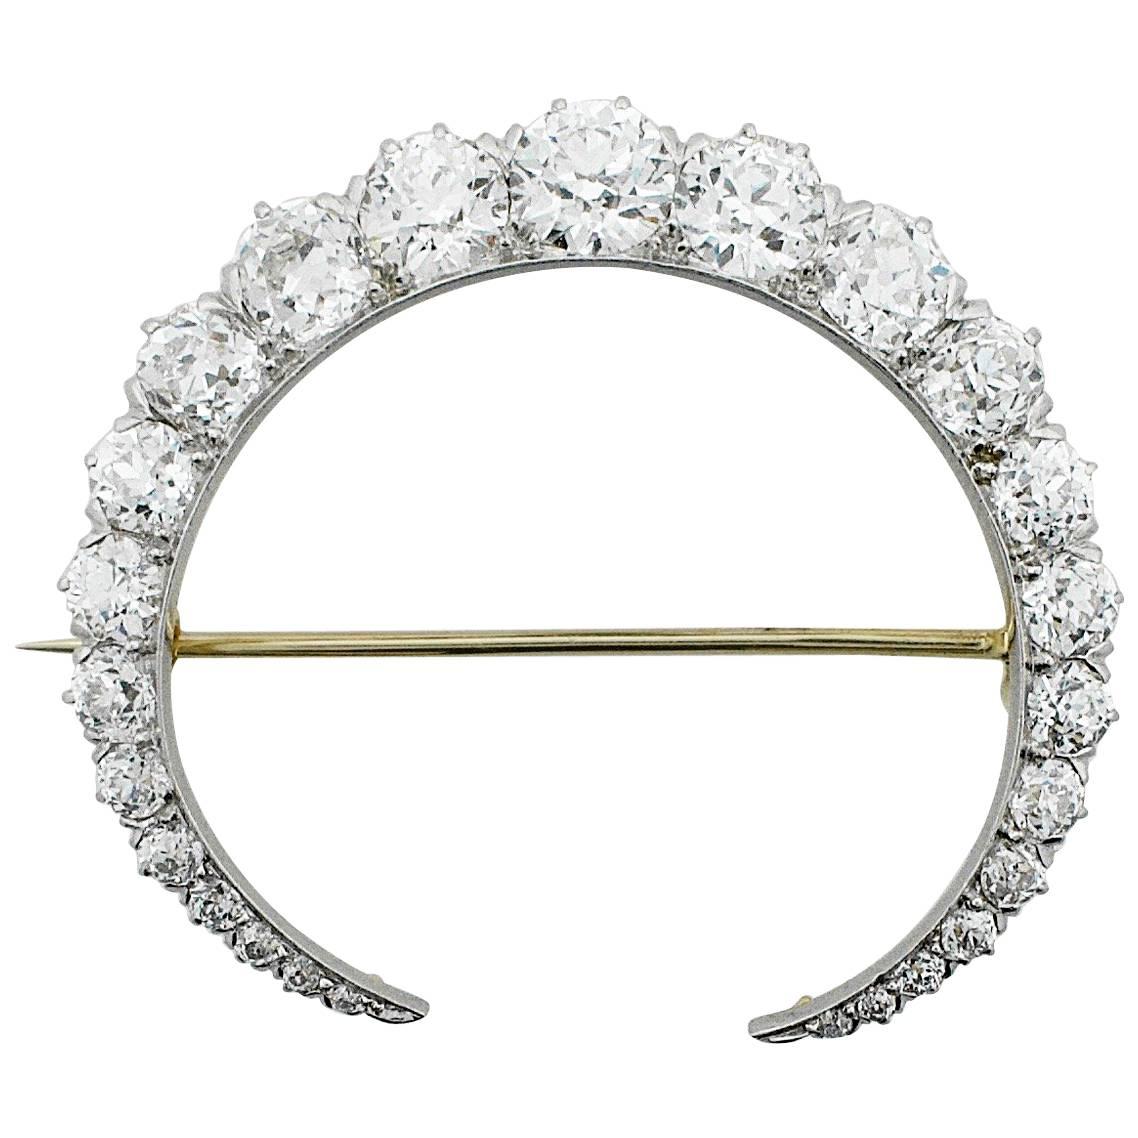 Tiffany and Co. Diamond Crescent Necklace/Brooch in Yellow Gold, circa 1900